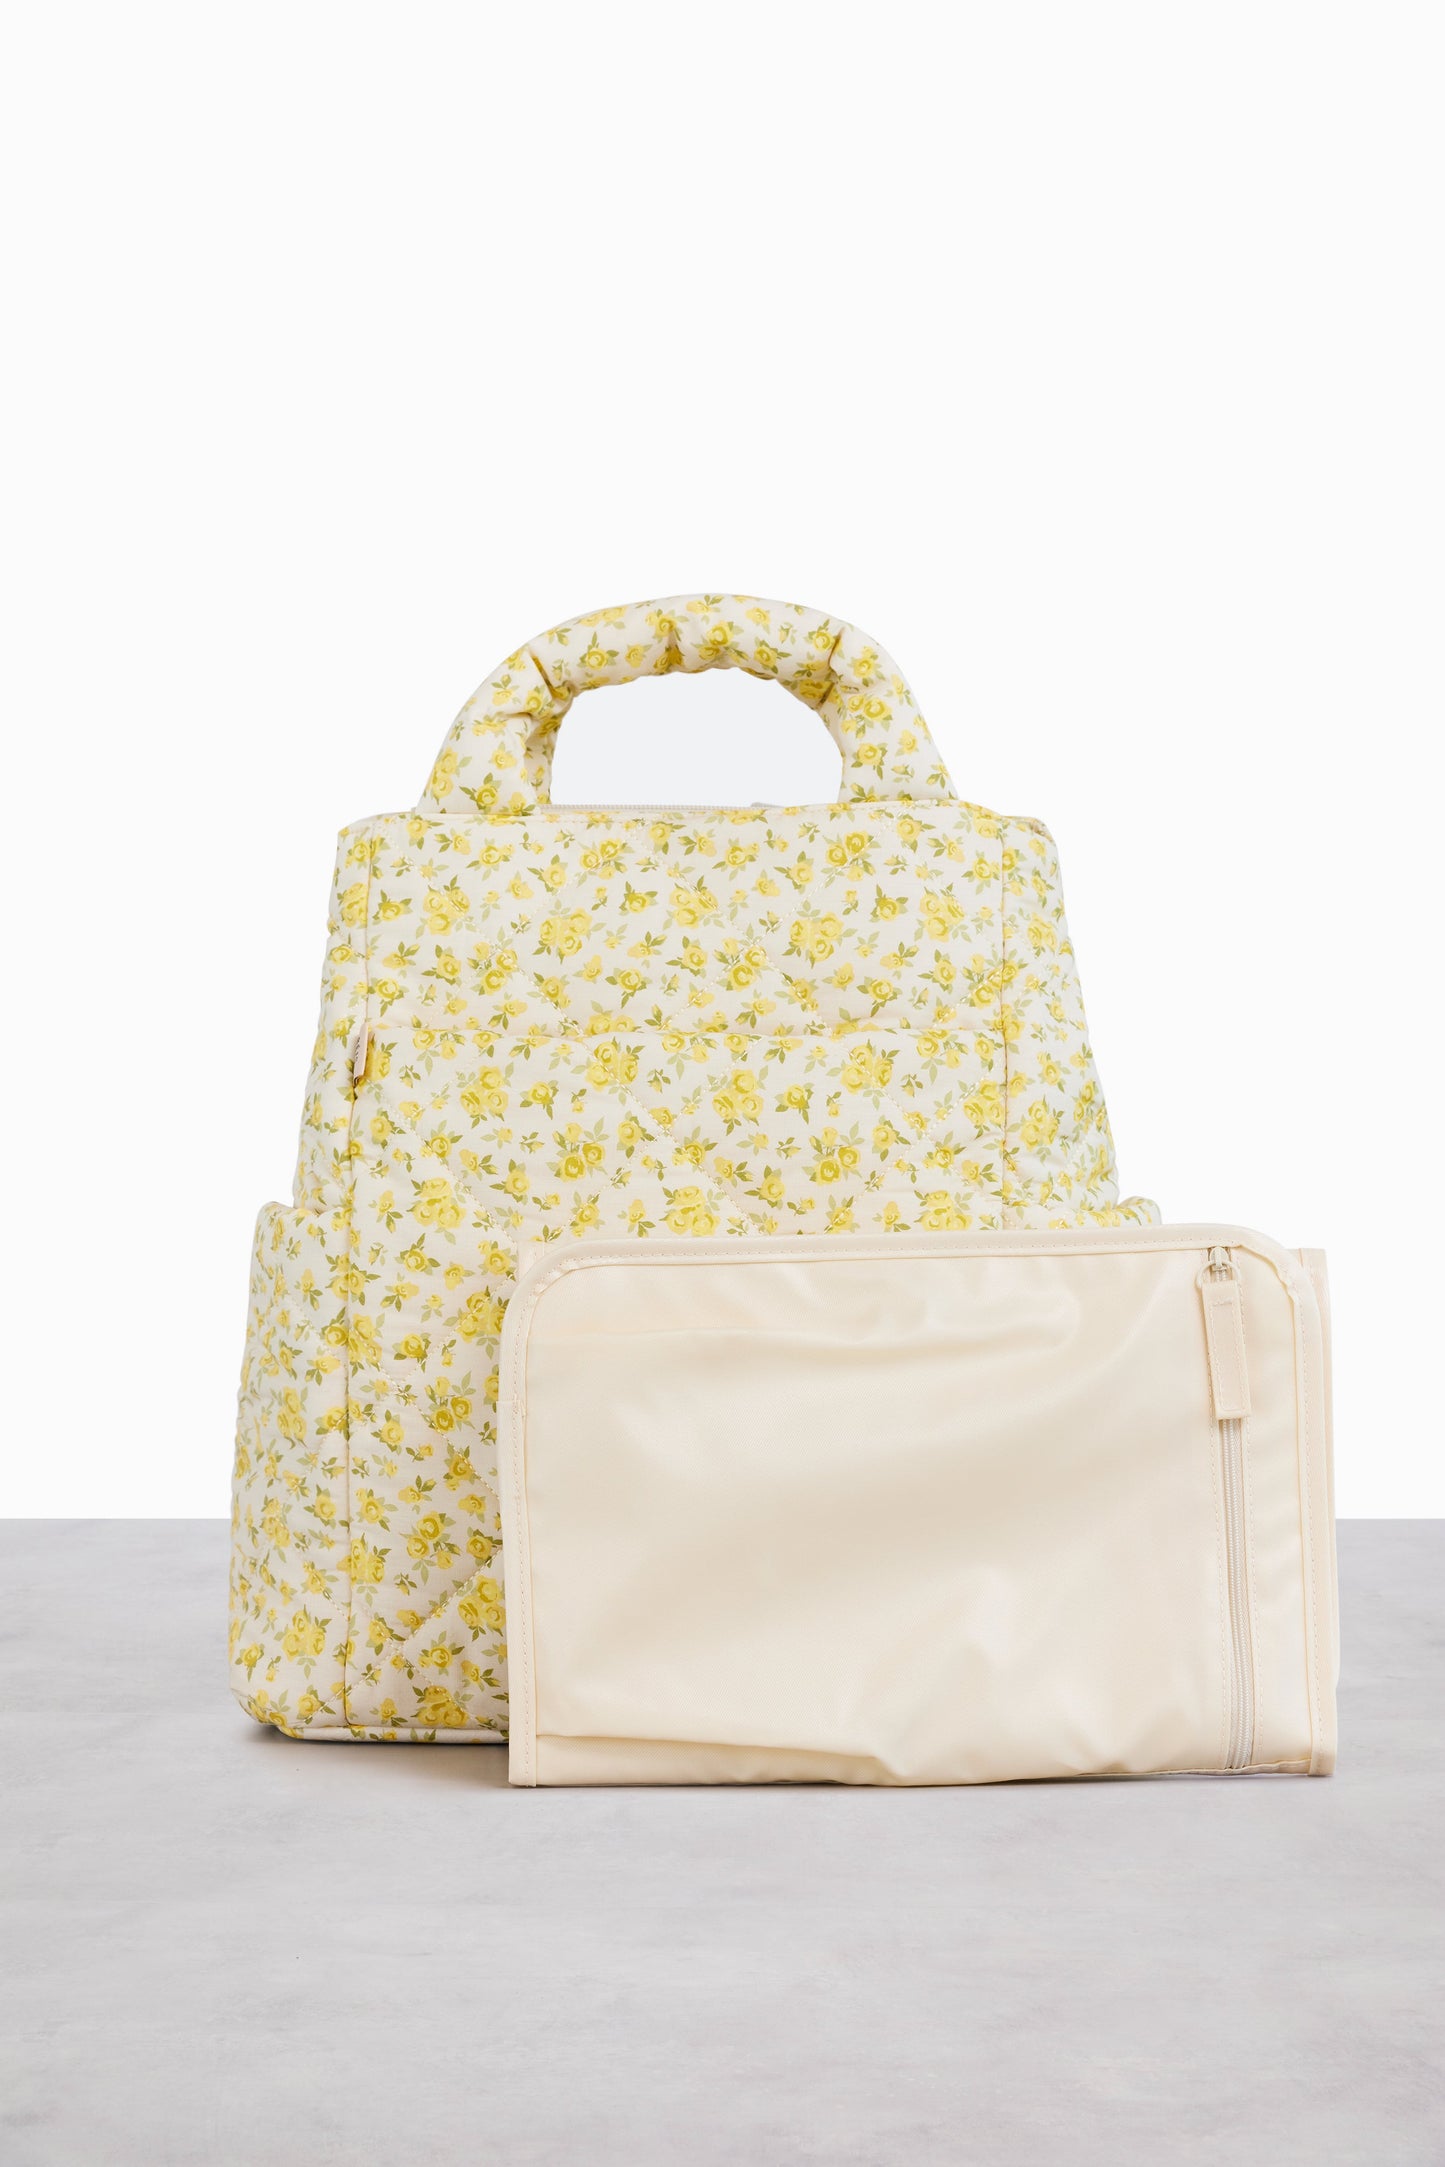 The Backpack Tote in Garden Party